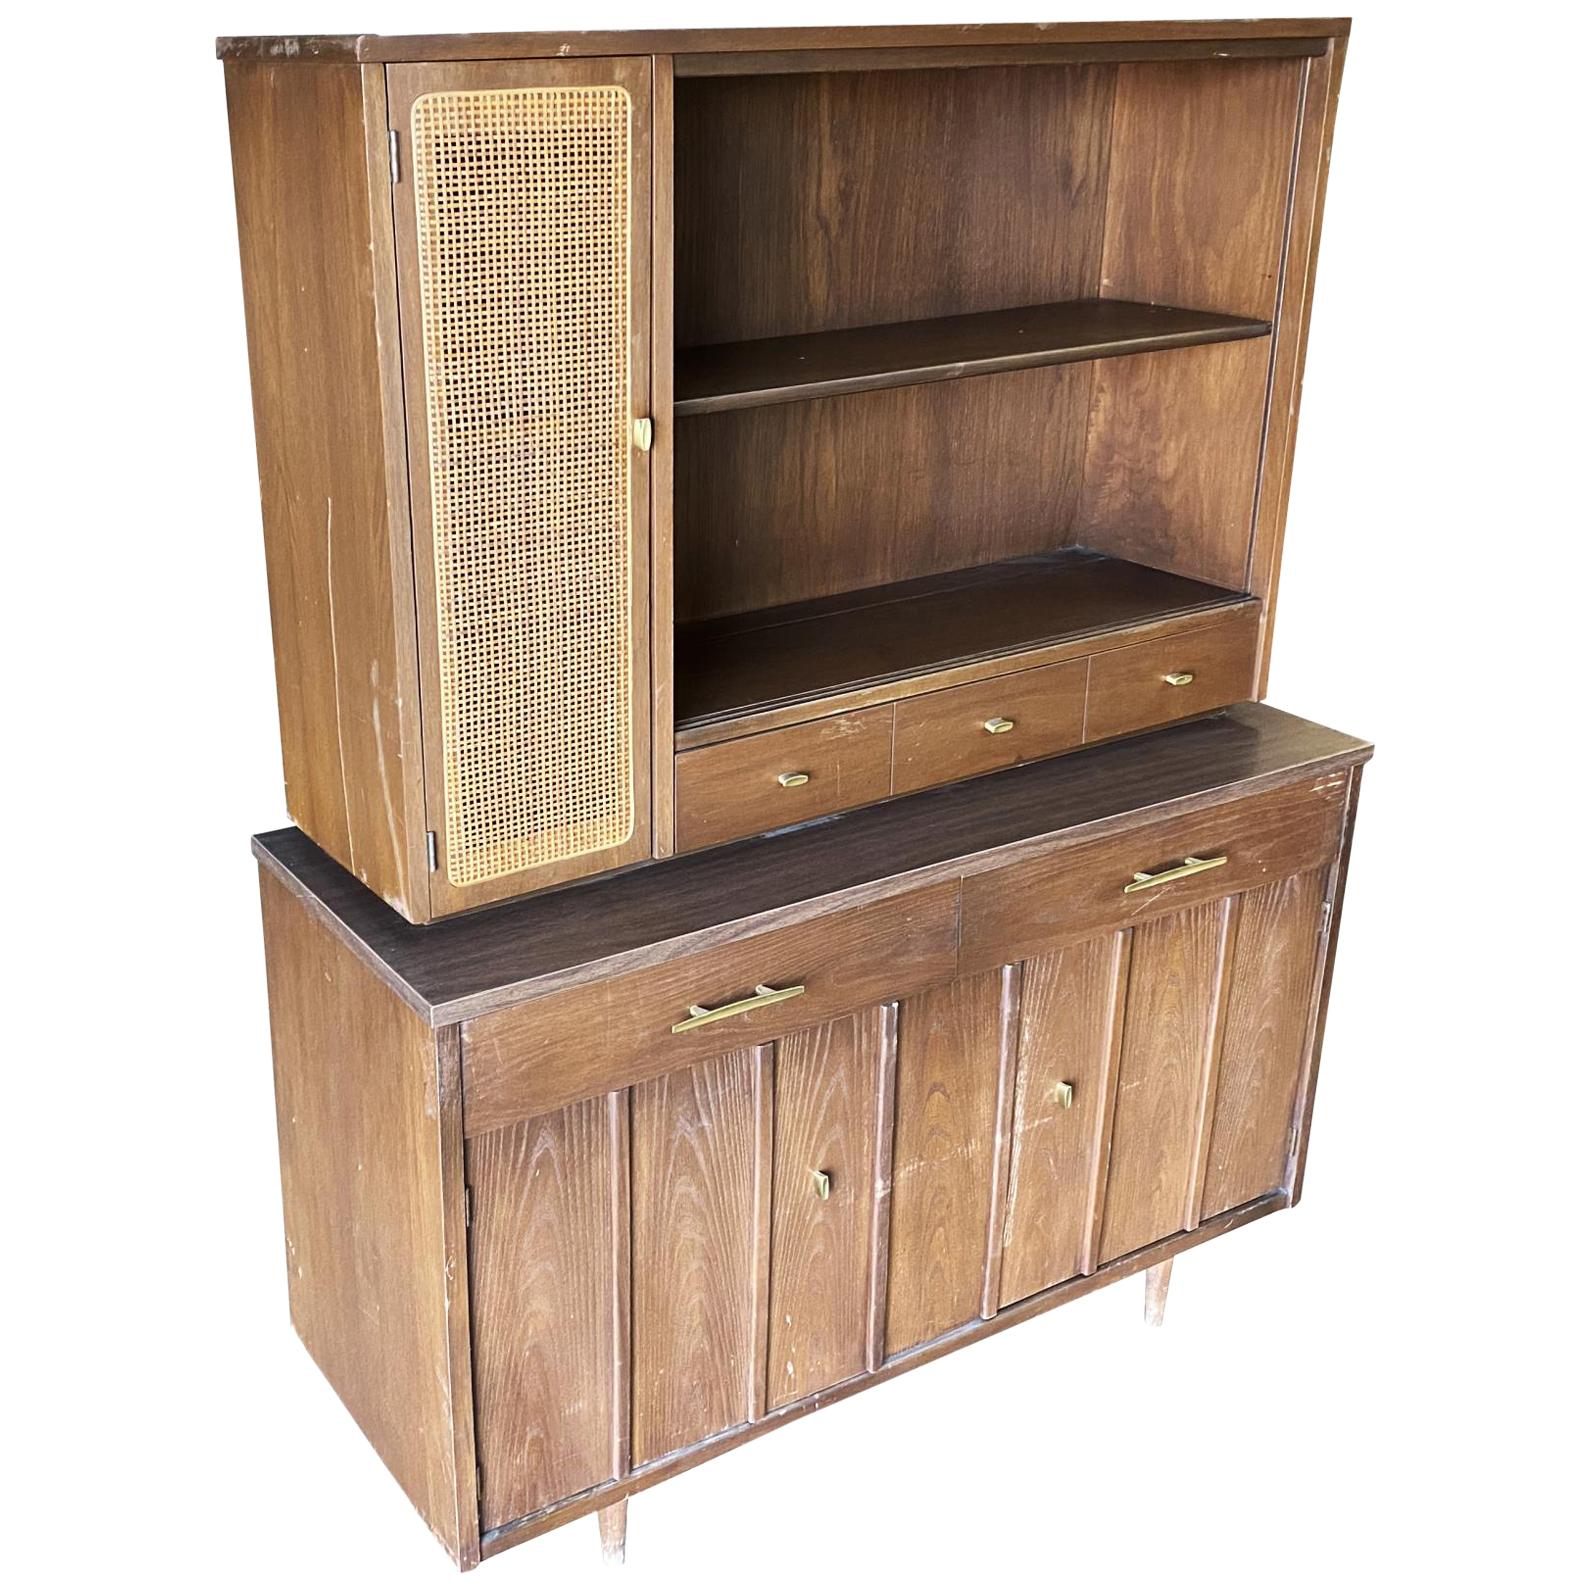 Midcentury Cupboard China Cabinet Shelf with Wicker Accents by Holman